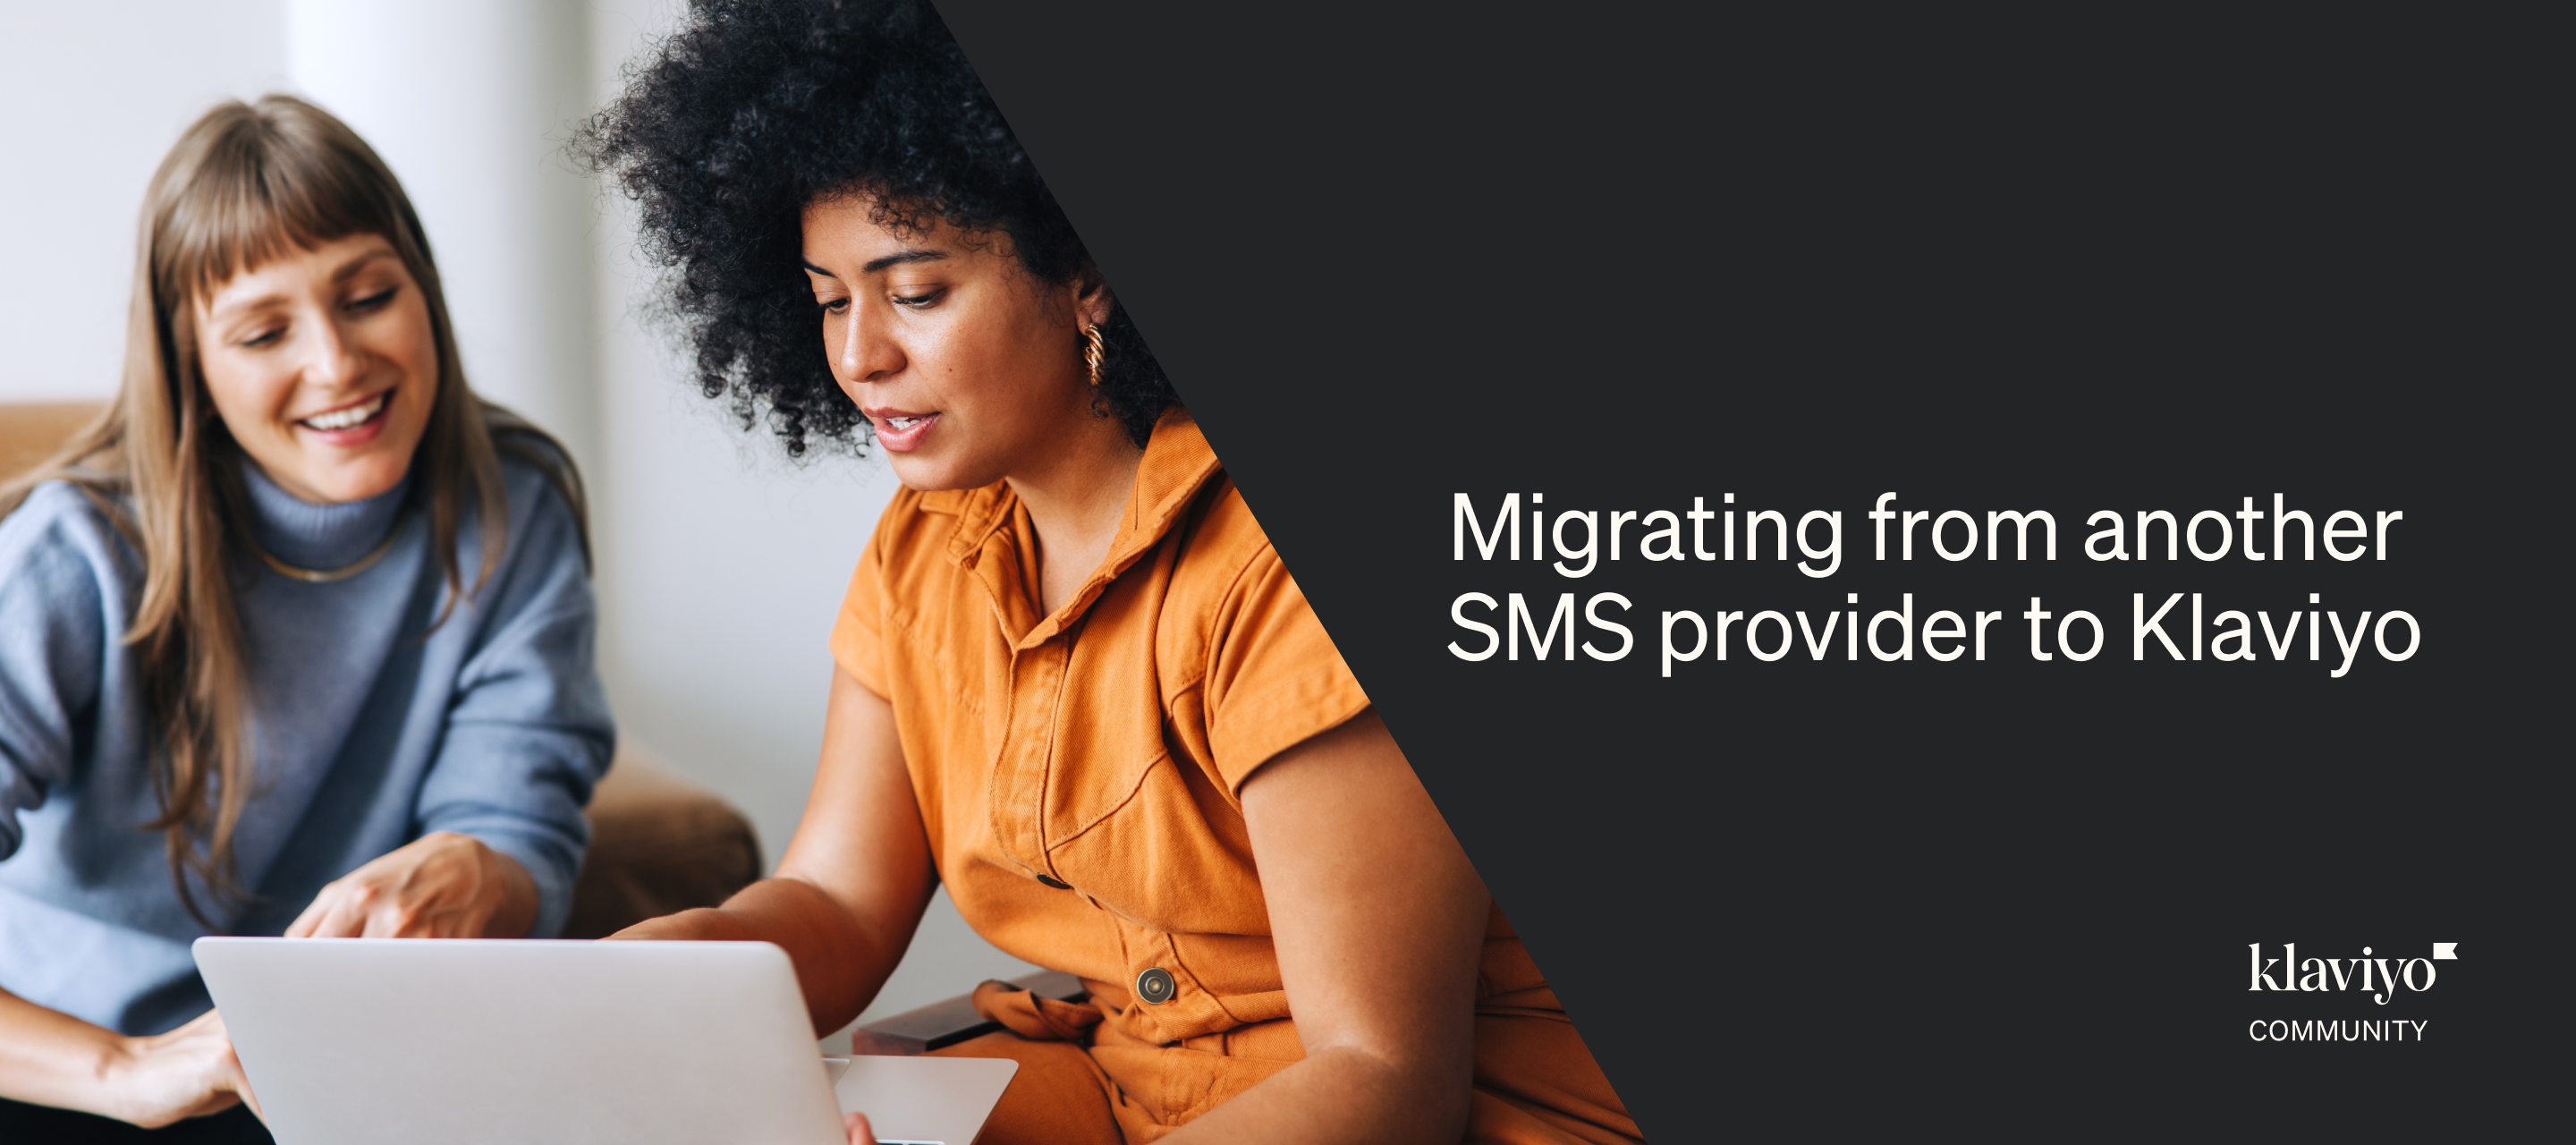 Migrating from another SMS provider to Klaviyo